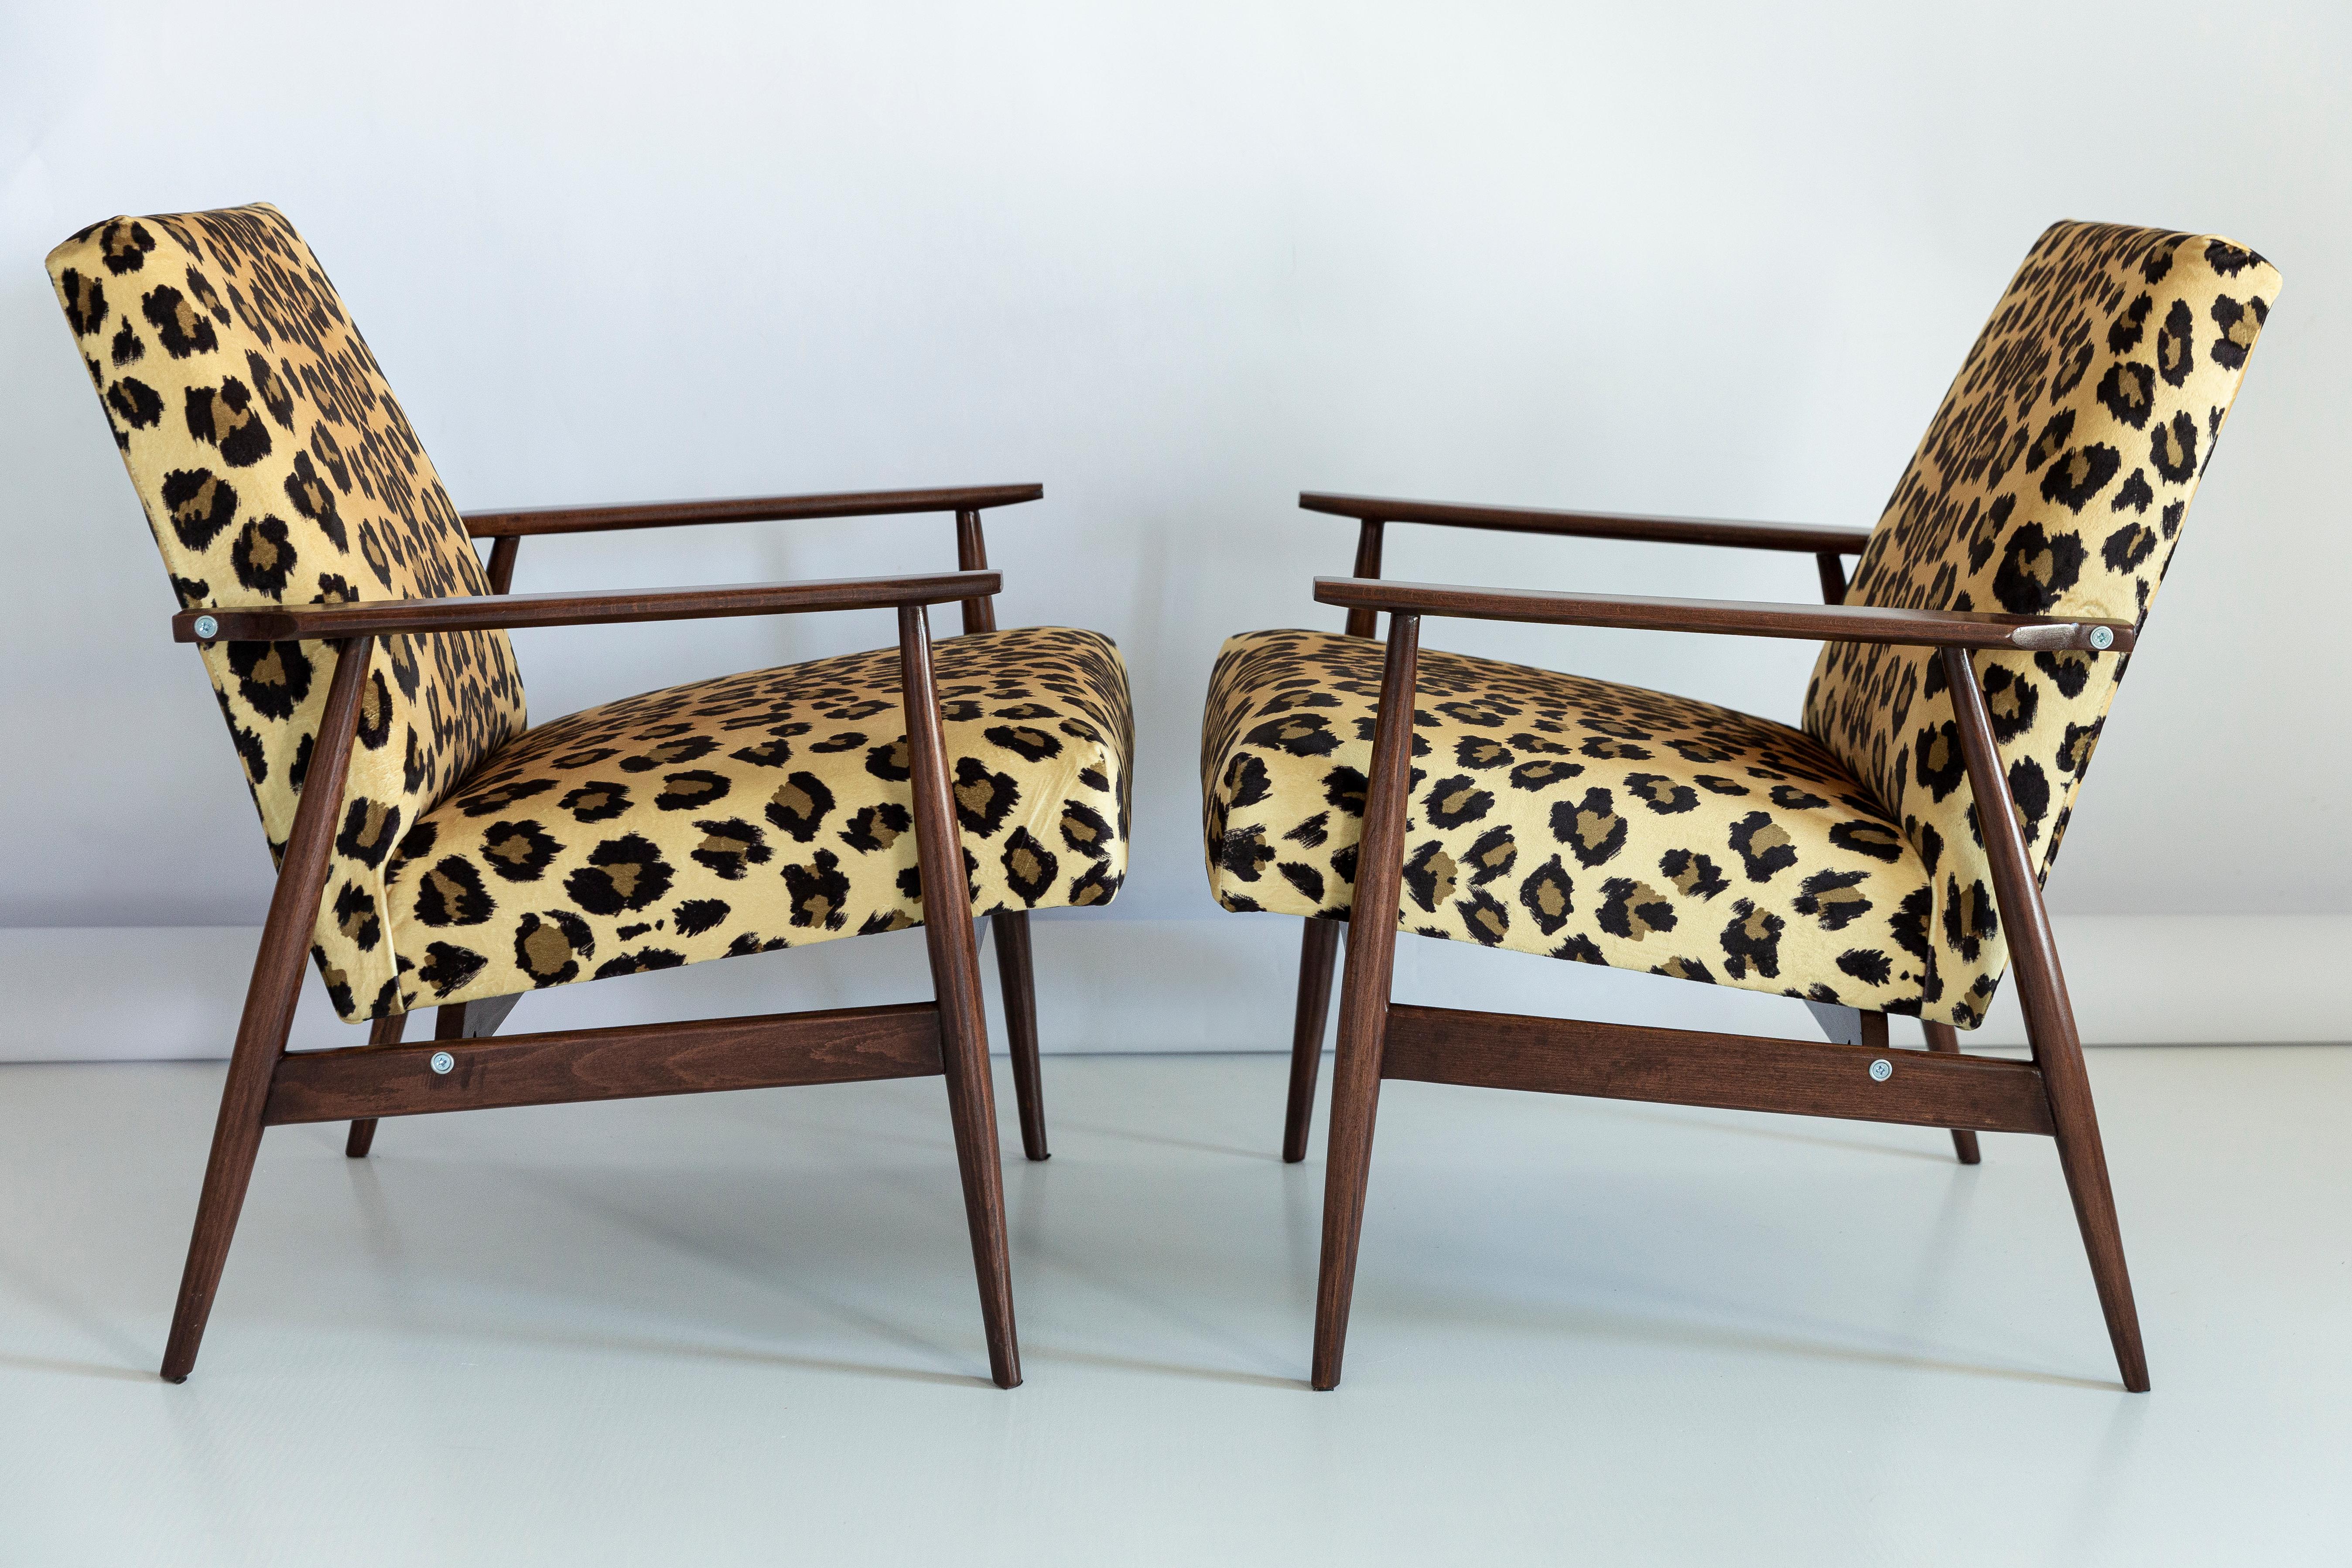 Set of four beautiful, restored armchairs designed by Henryk Lis. Furniture after full carpentry and upholstery renovation. The fabric, which is covered with a backrest and a seat, is a high-quality Italian velvet upholstery printed in leopard